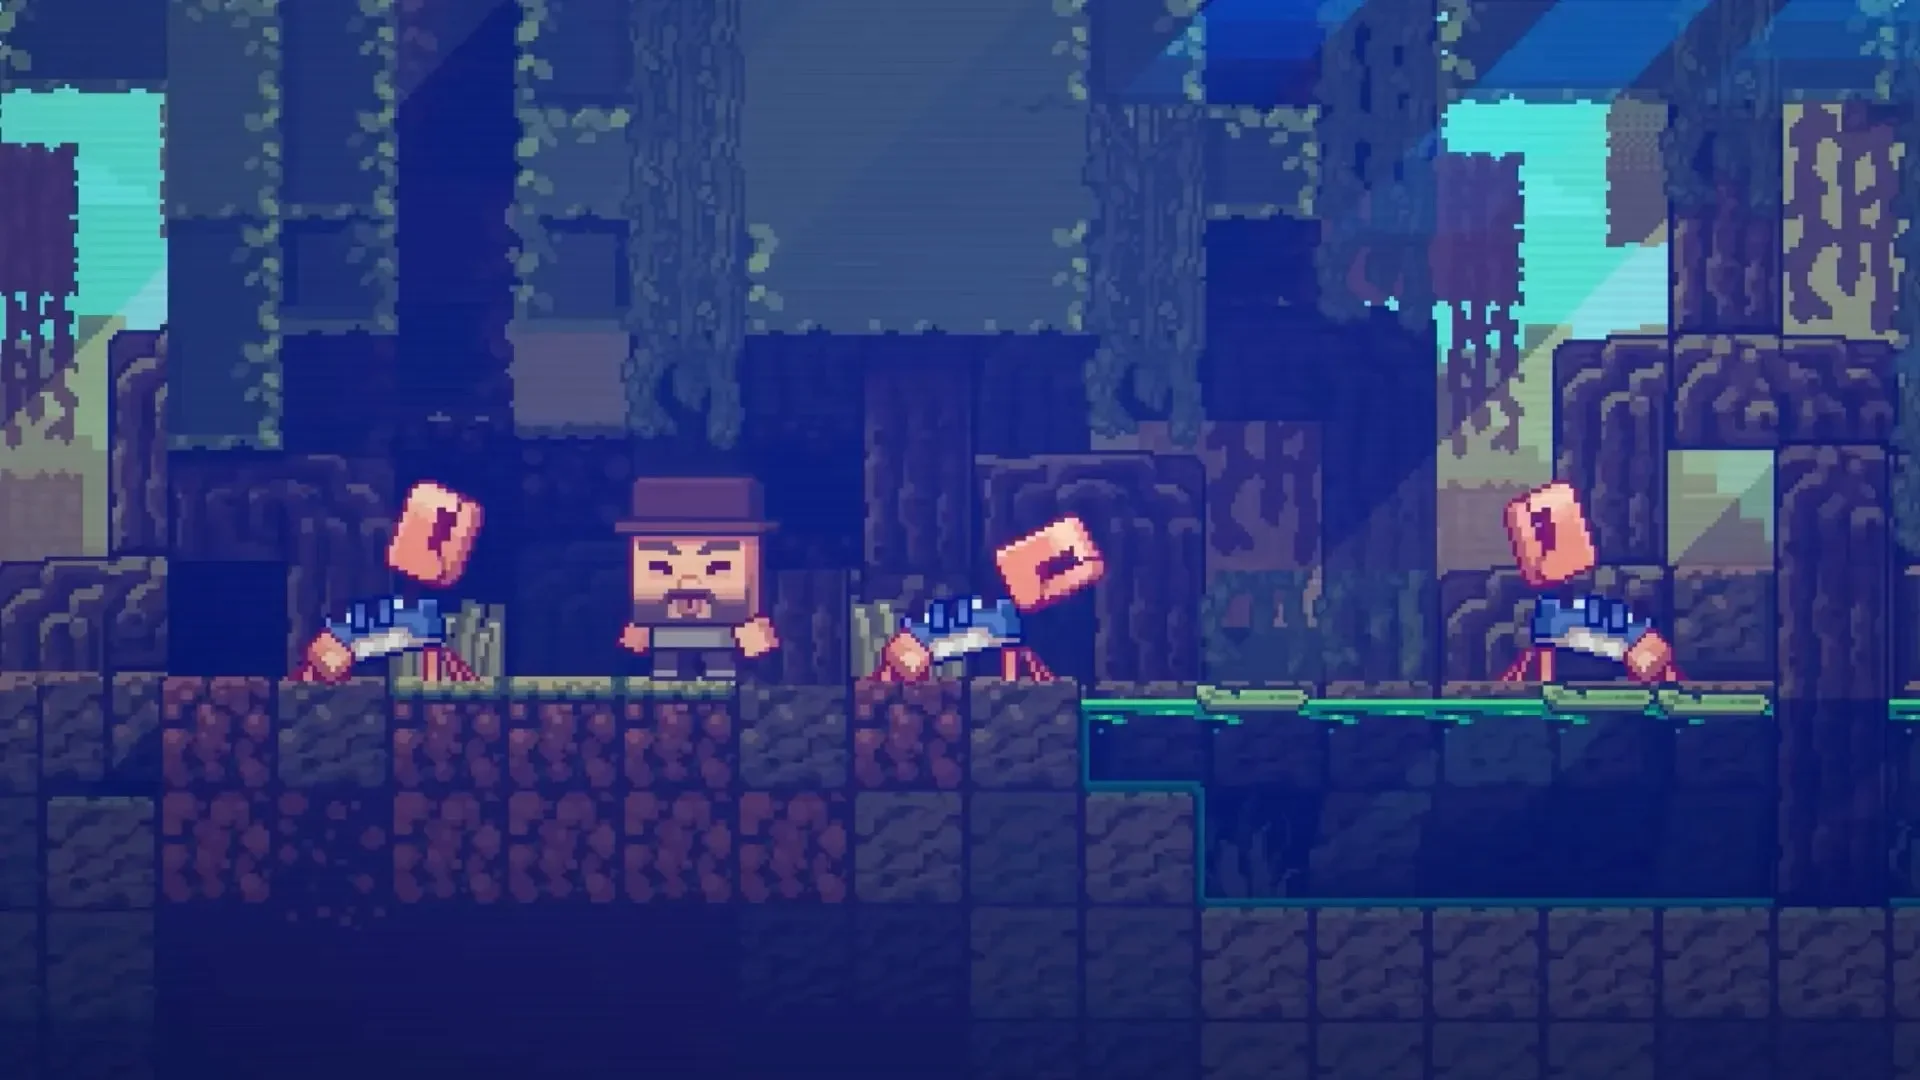 The creators of Minecraft presented the first candidate for the role of a new mob in the game